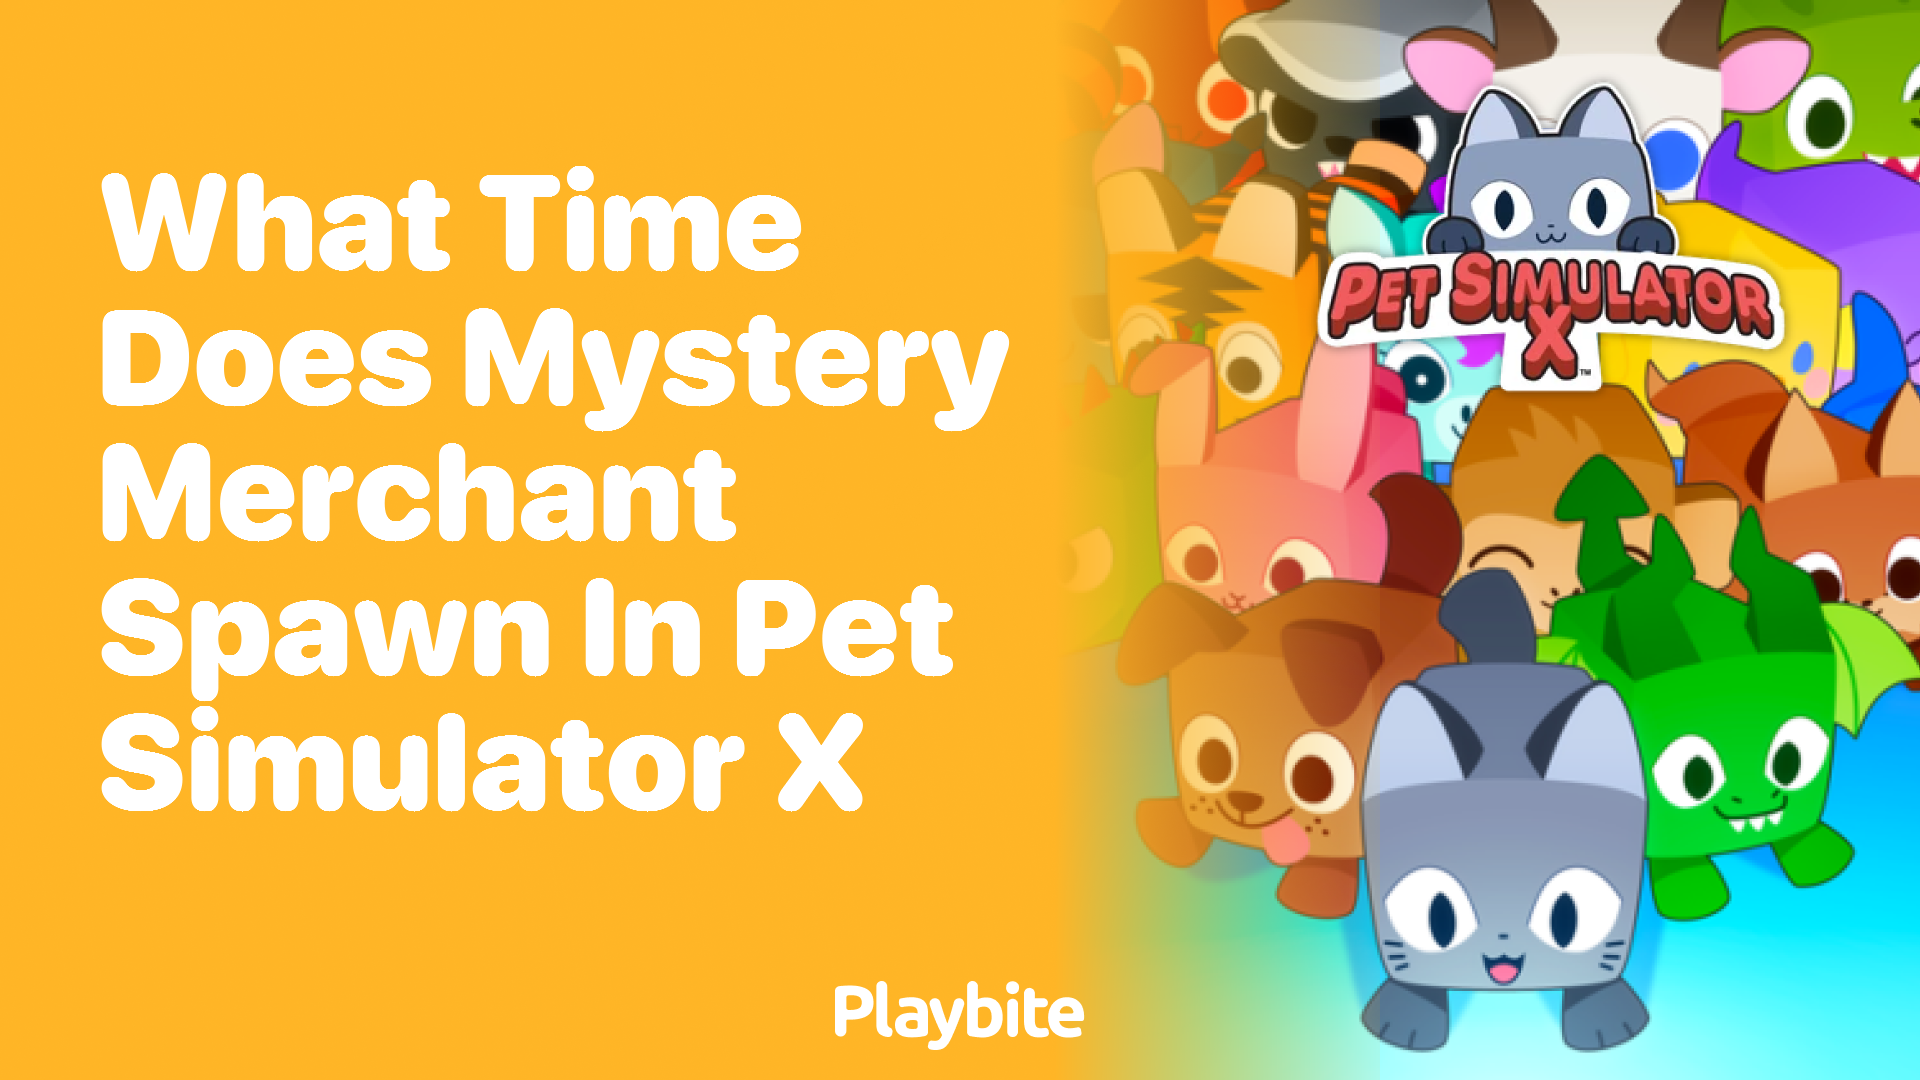 Discover When the Mystery Merchant Appears in Pet Simulator X